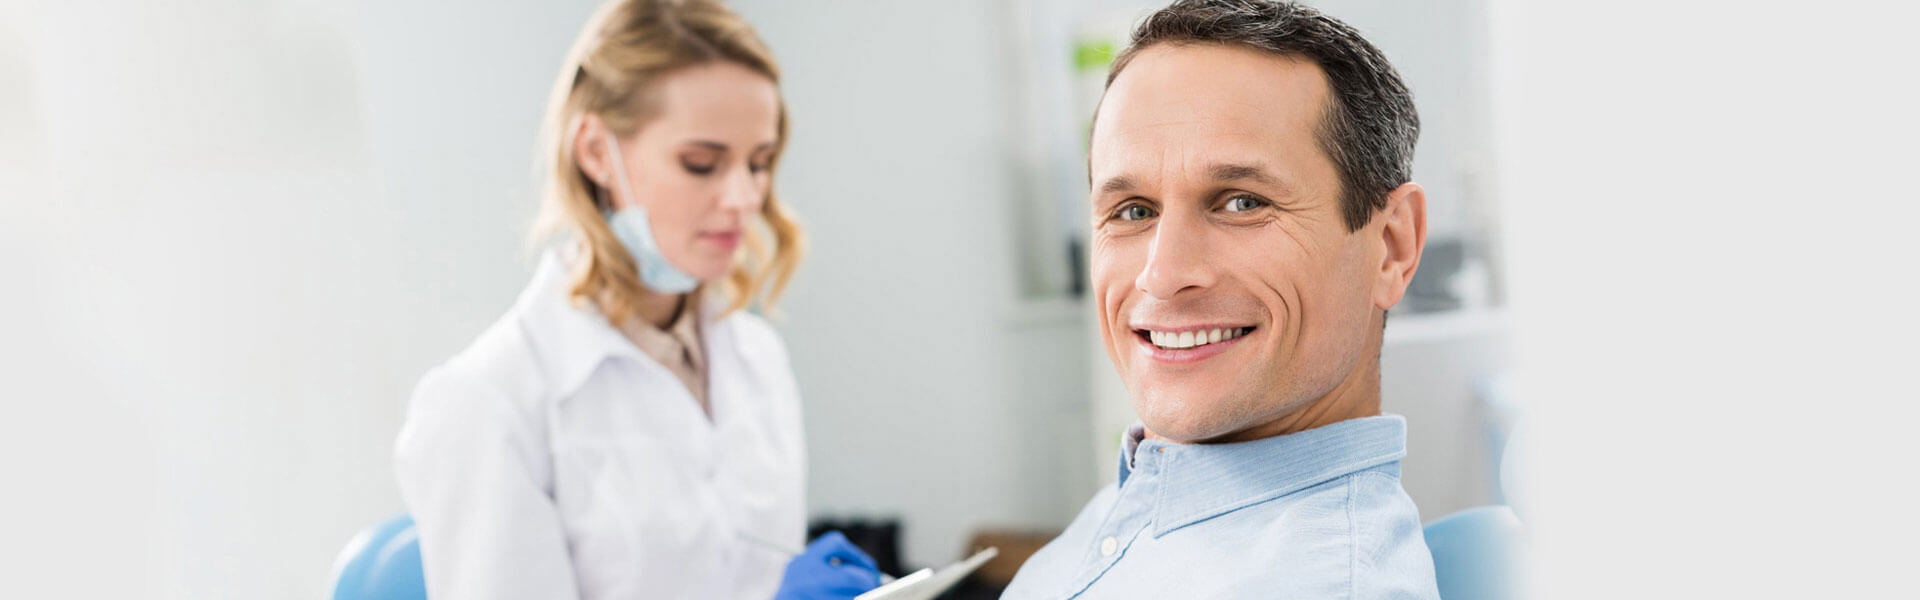 9 Common Questions about General Dentistry Answered